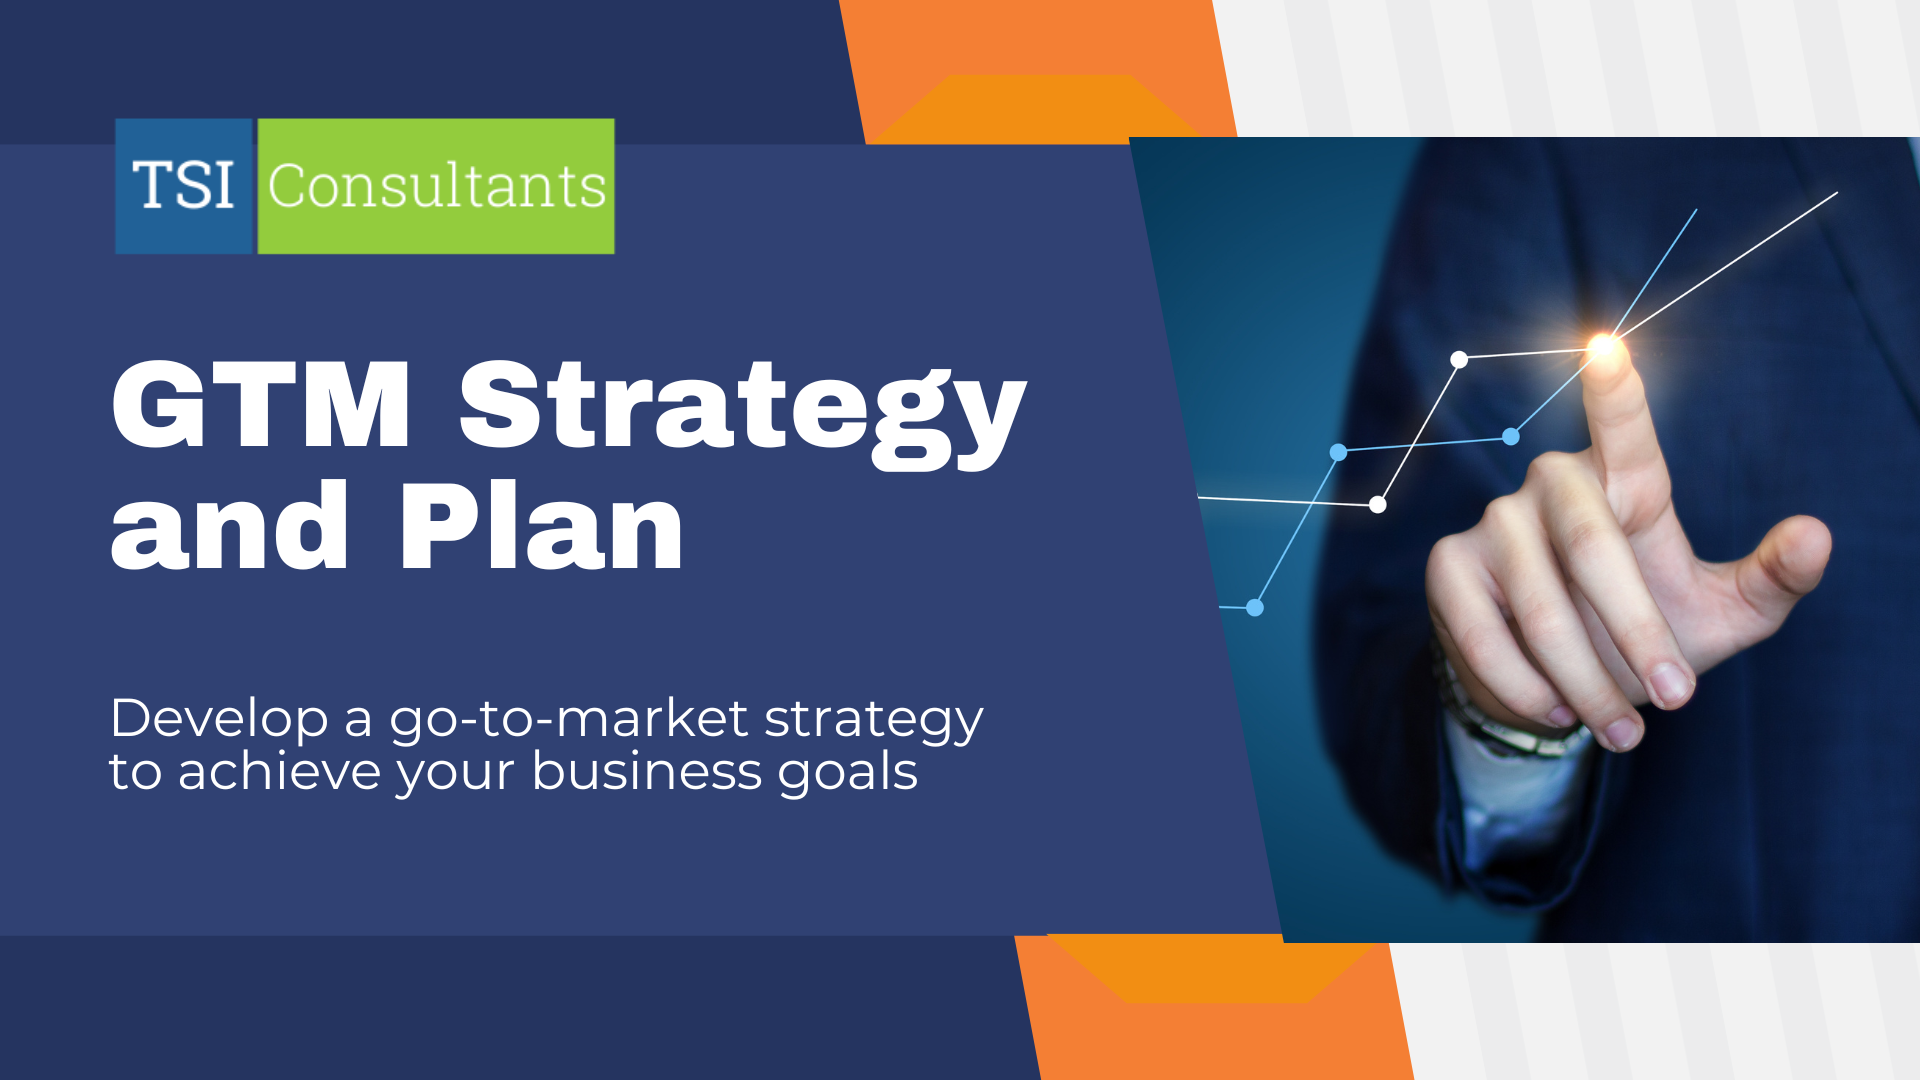 GTM Strategy and Plan